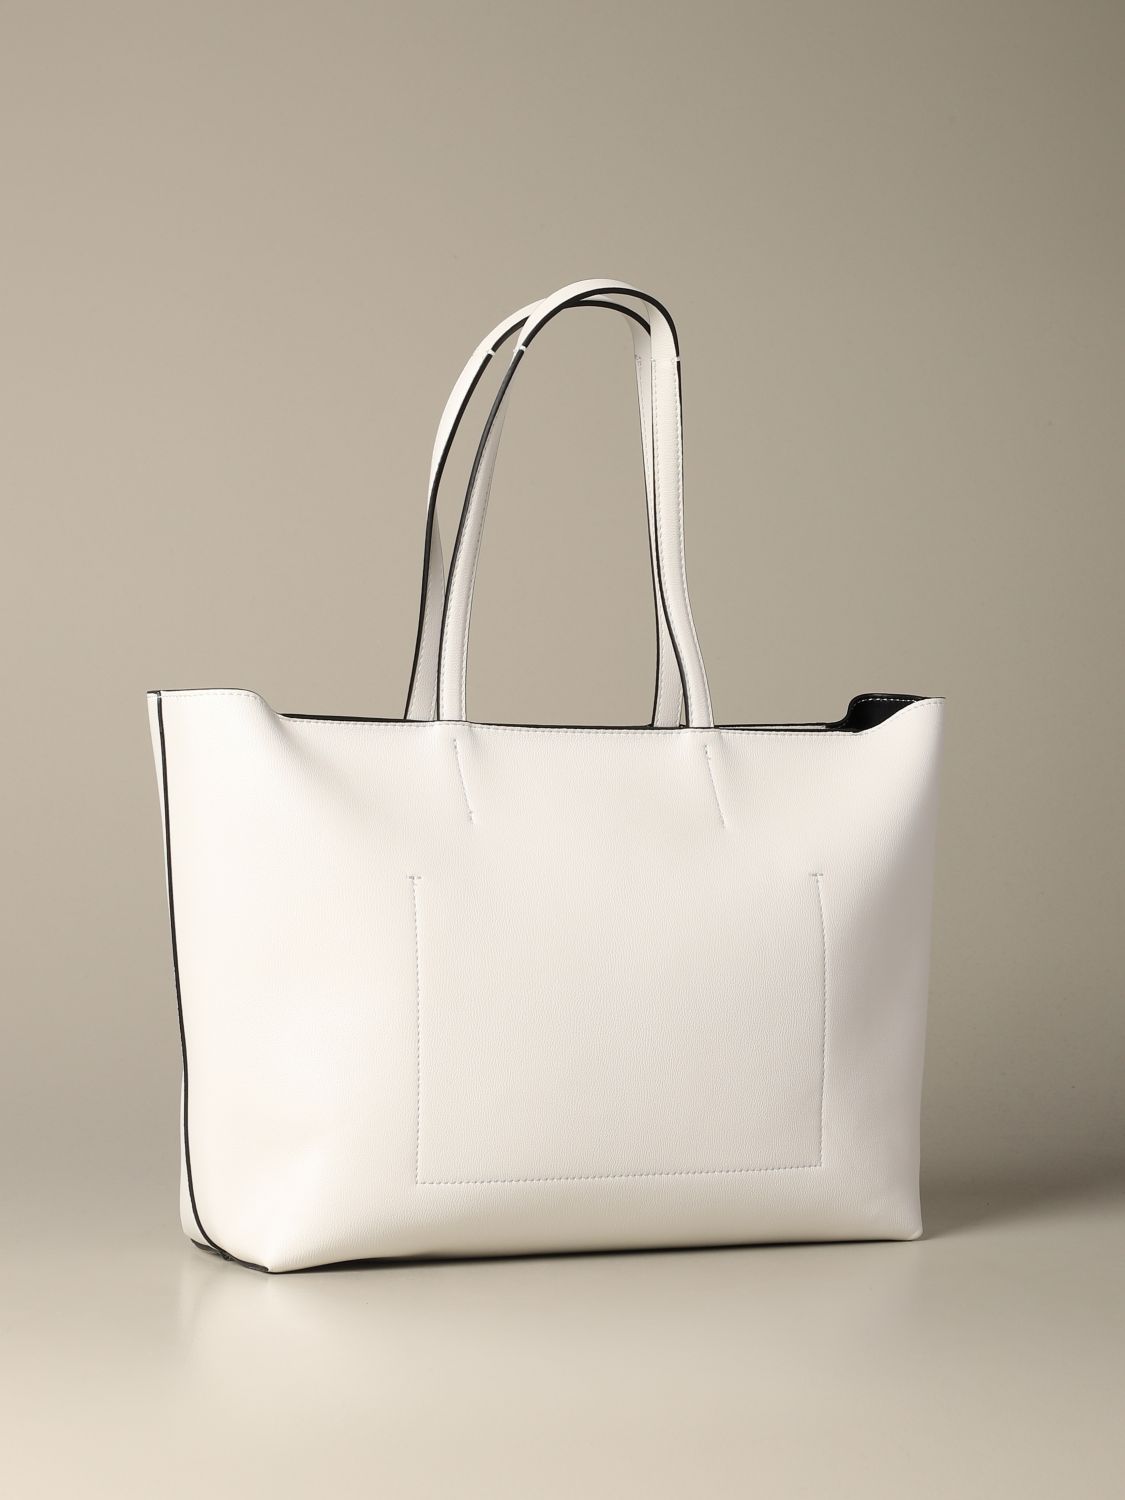 Sanctuary Dwell Elevated Calvin Klein Outlet: tote bags for woman - White | Calvin Klein tote bags  K60K606184 online on GIGLIO.COM